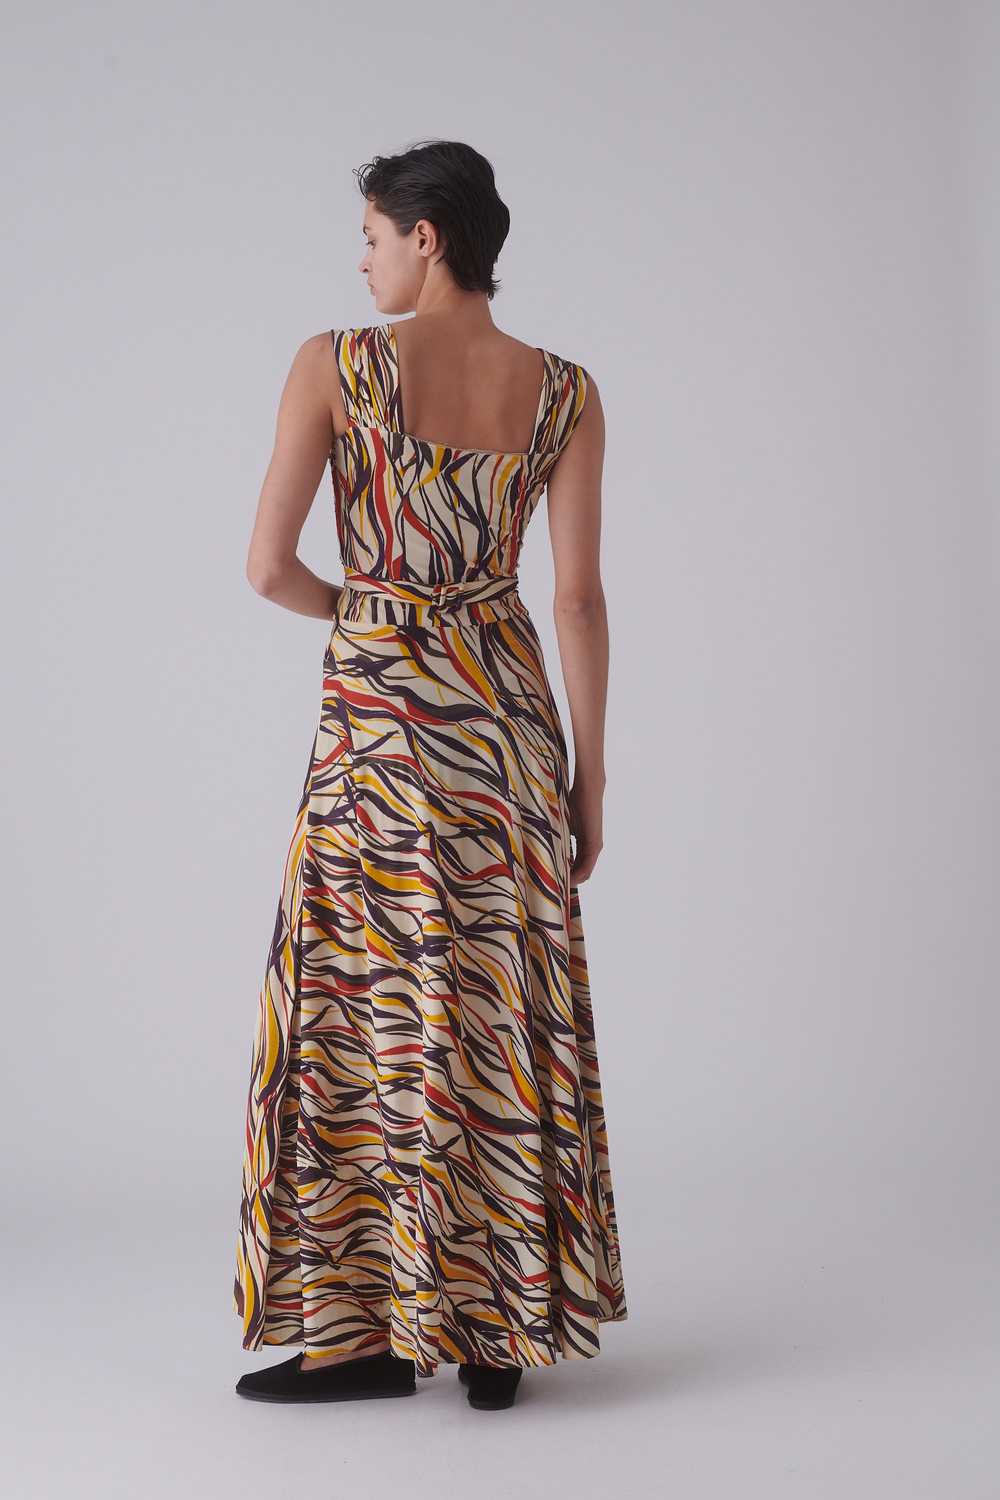 1930s Print Gown - image 2